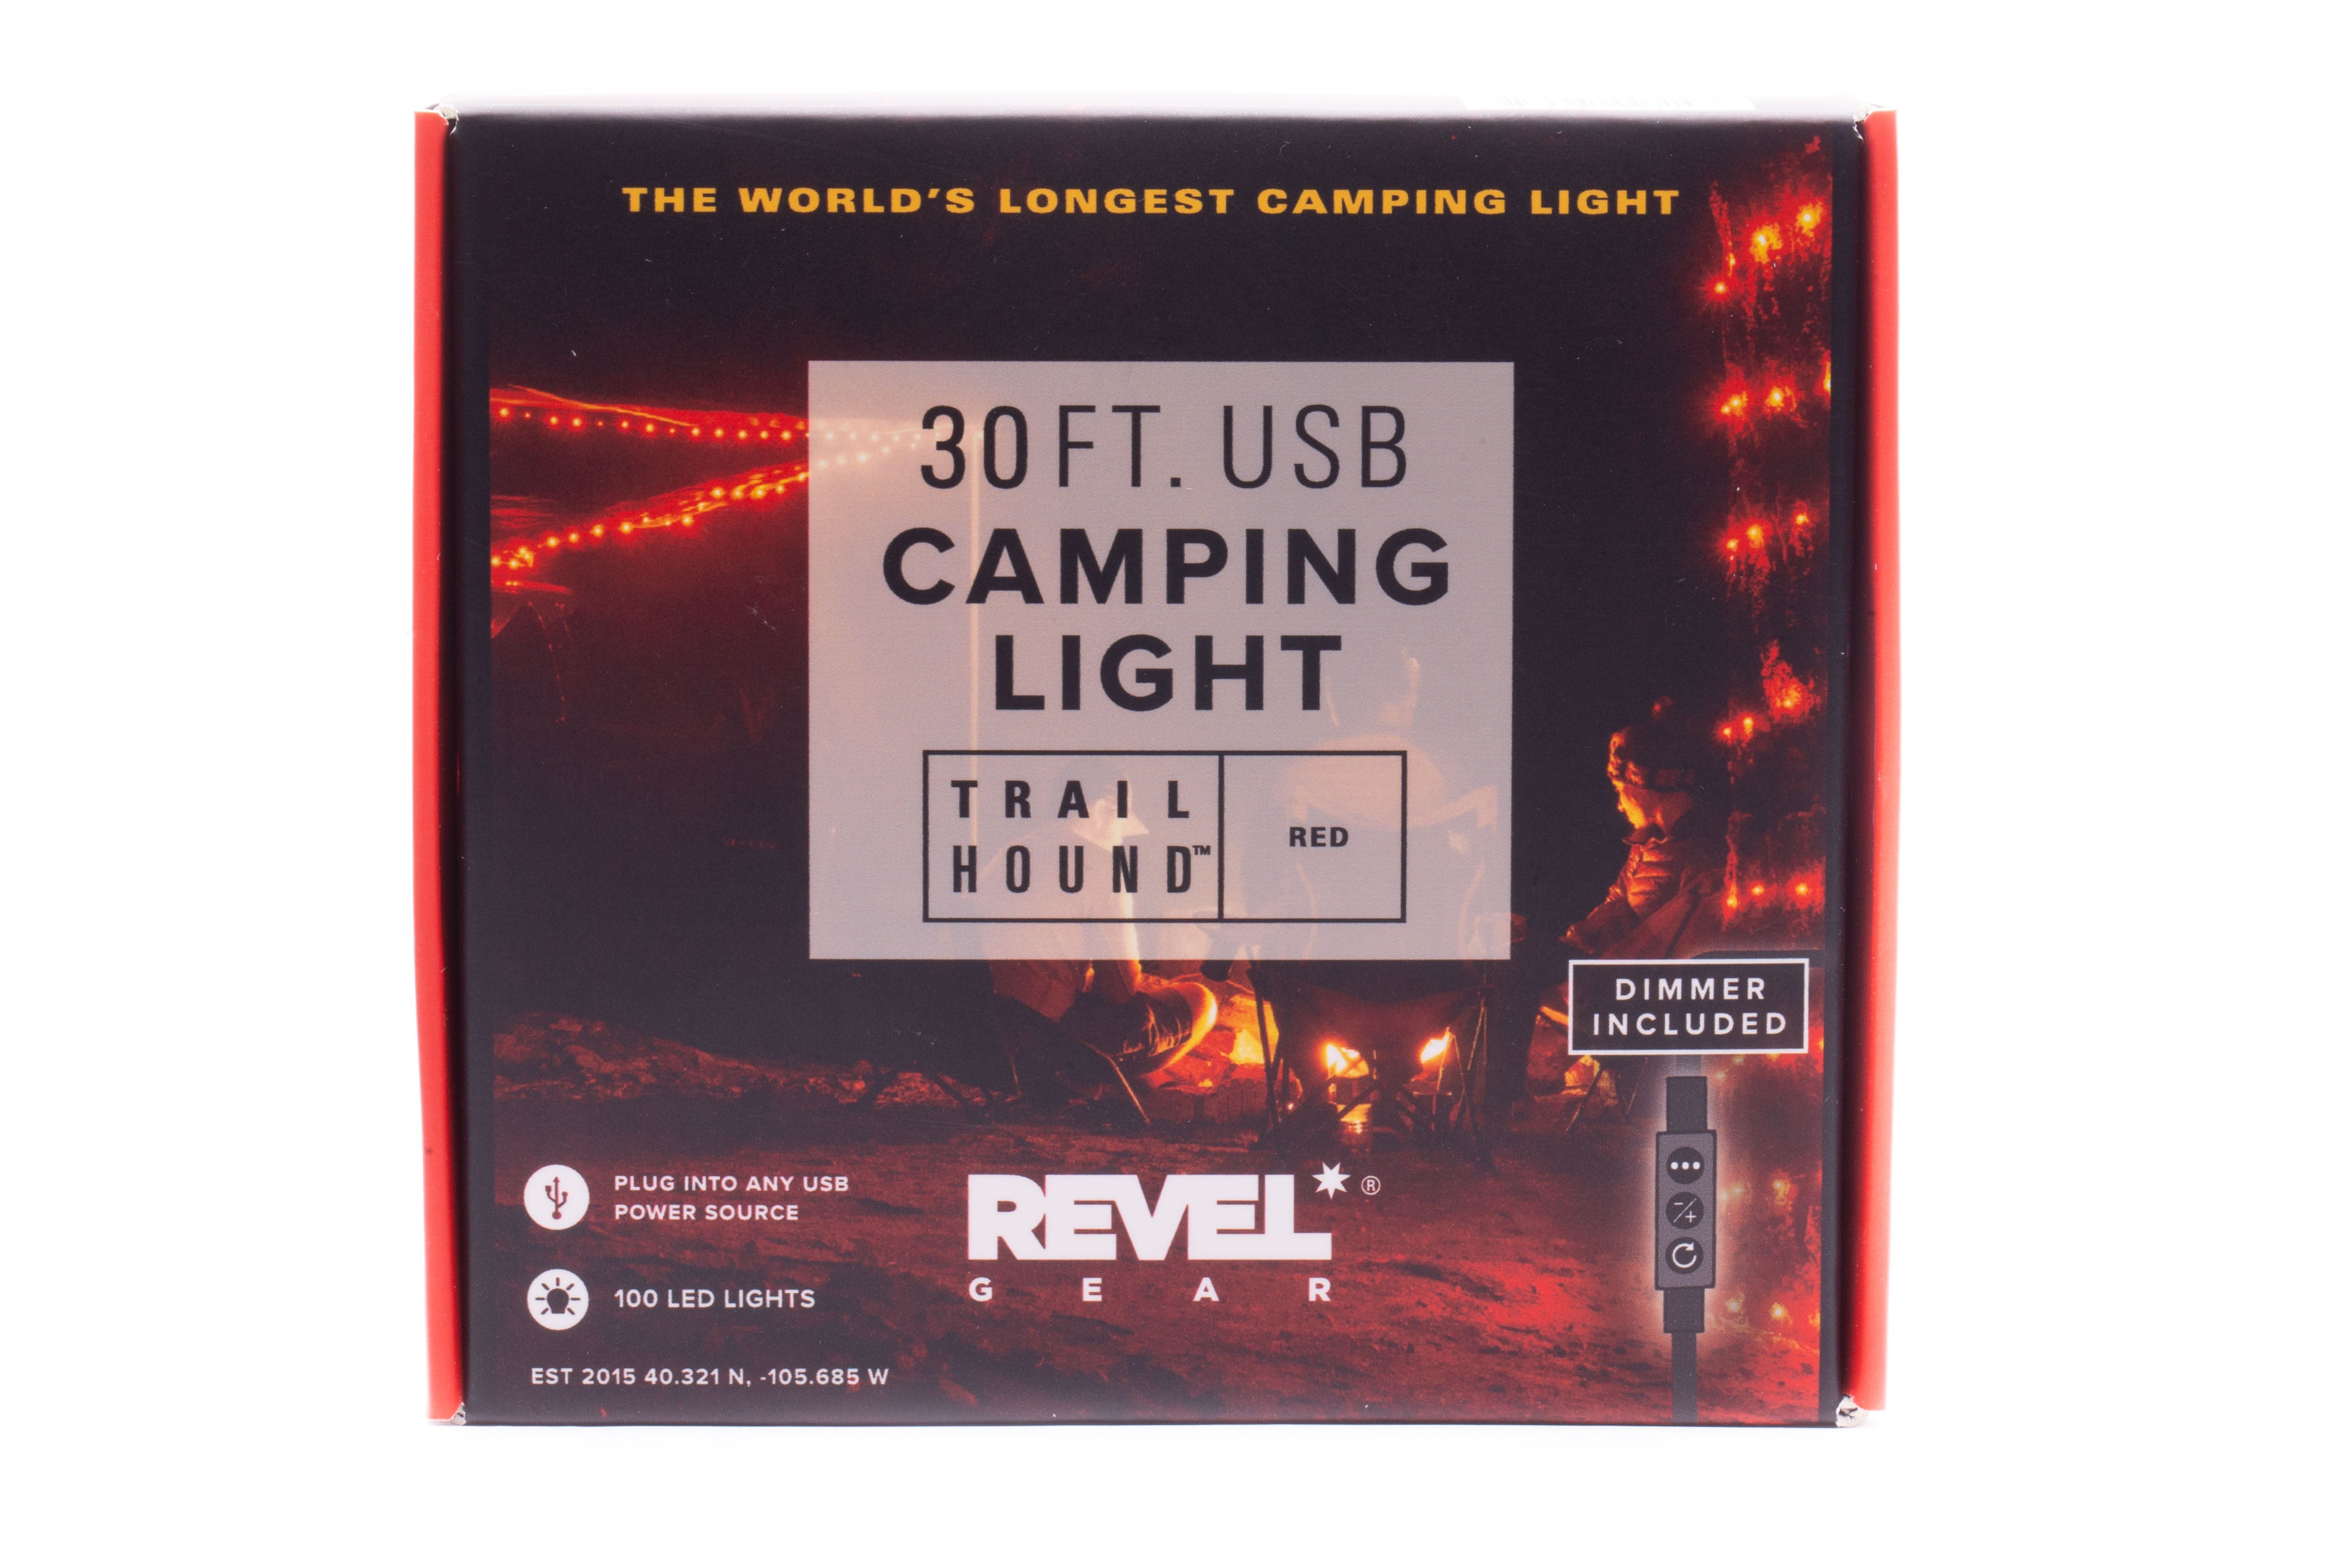 Revel Gear Trail Hound 30ft Camping Light Red with Dimmer